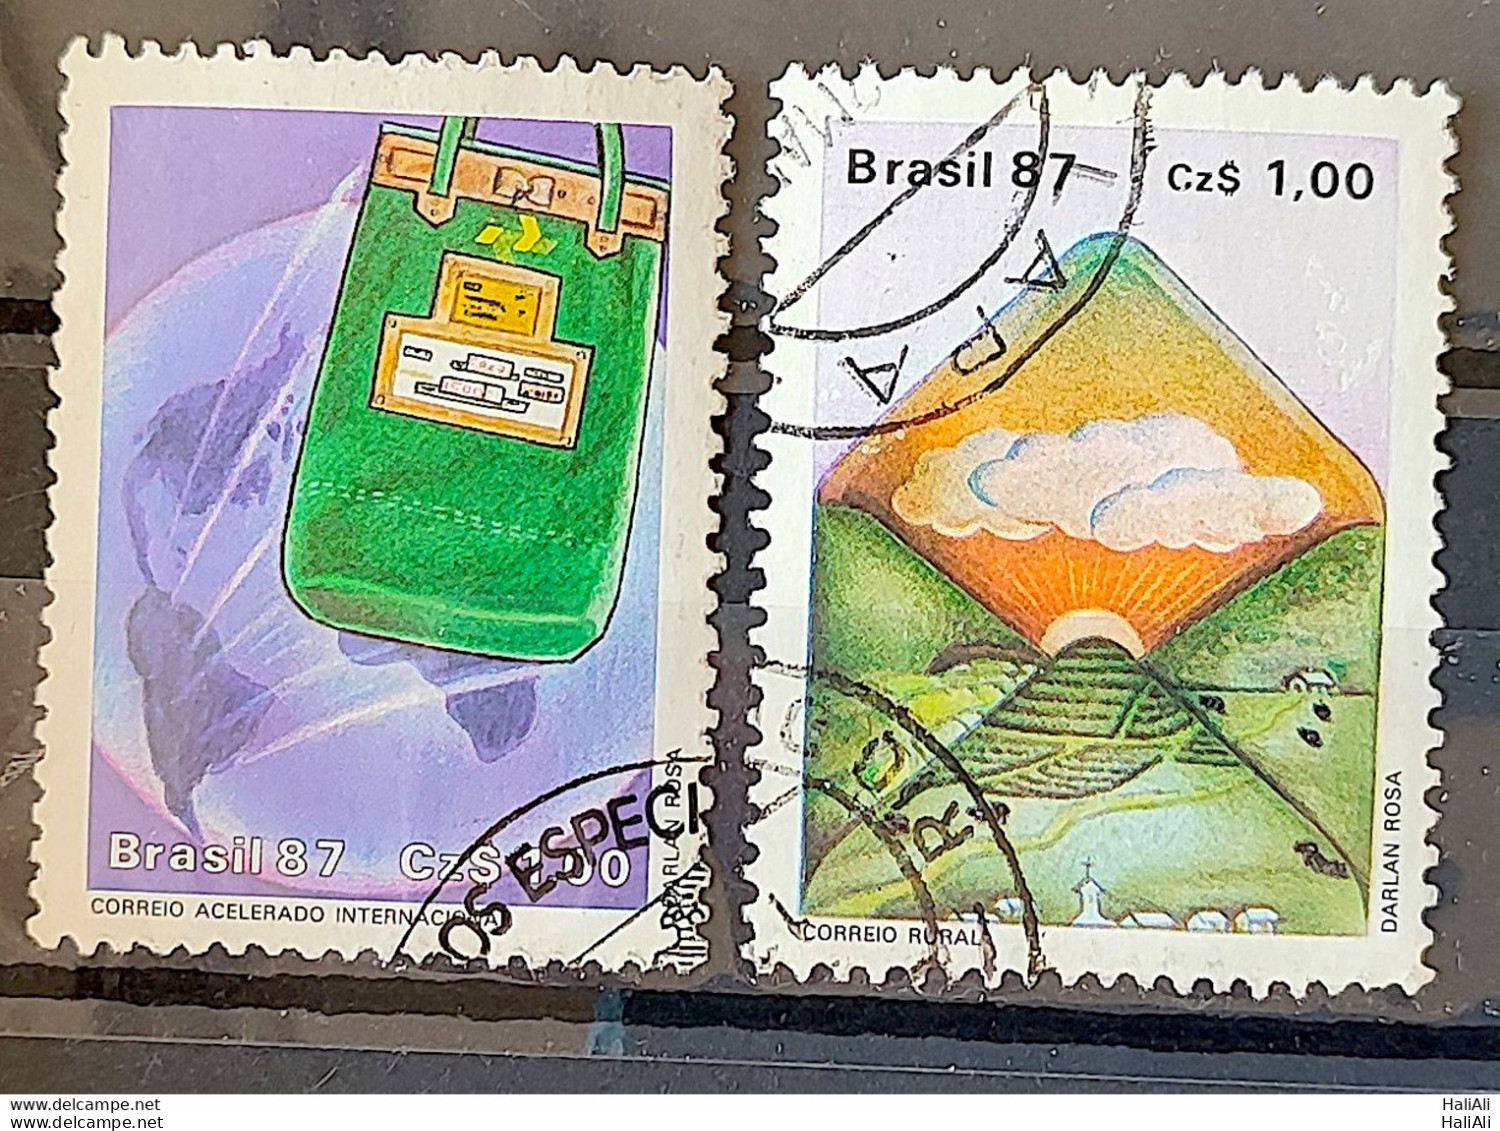 C 1545 Brazil Stamp Postal Service Malote Letter 1987 Complete Series Circulated 2 - Used Stamps